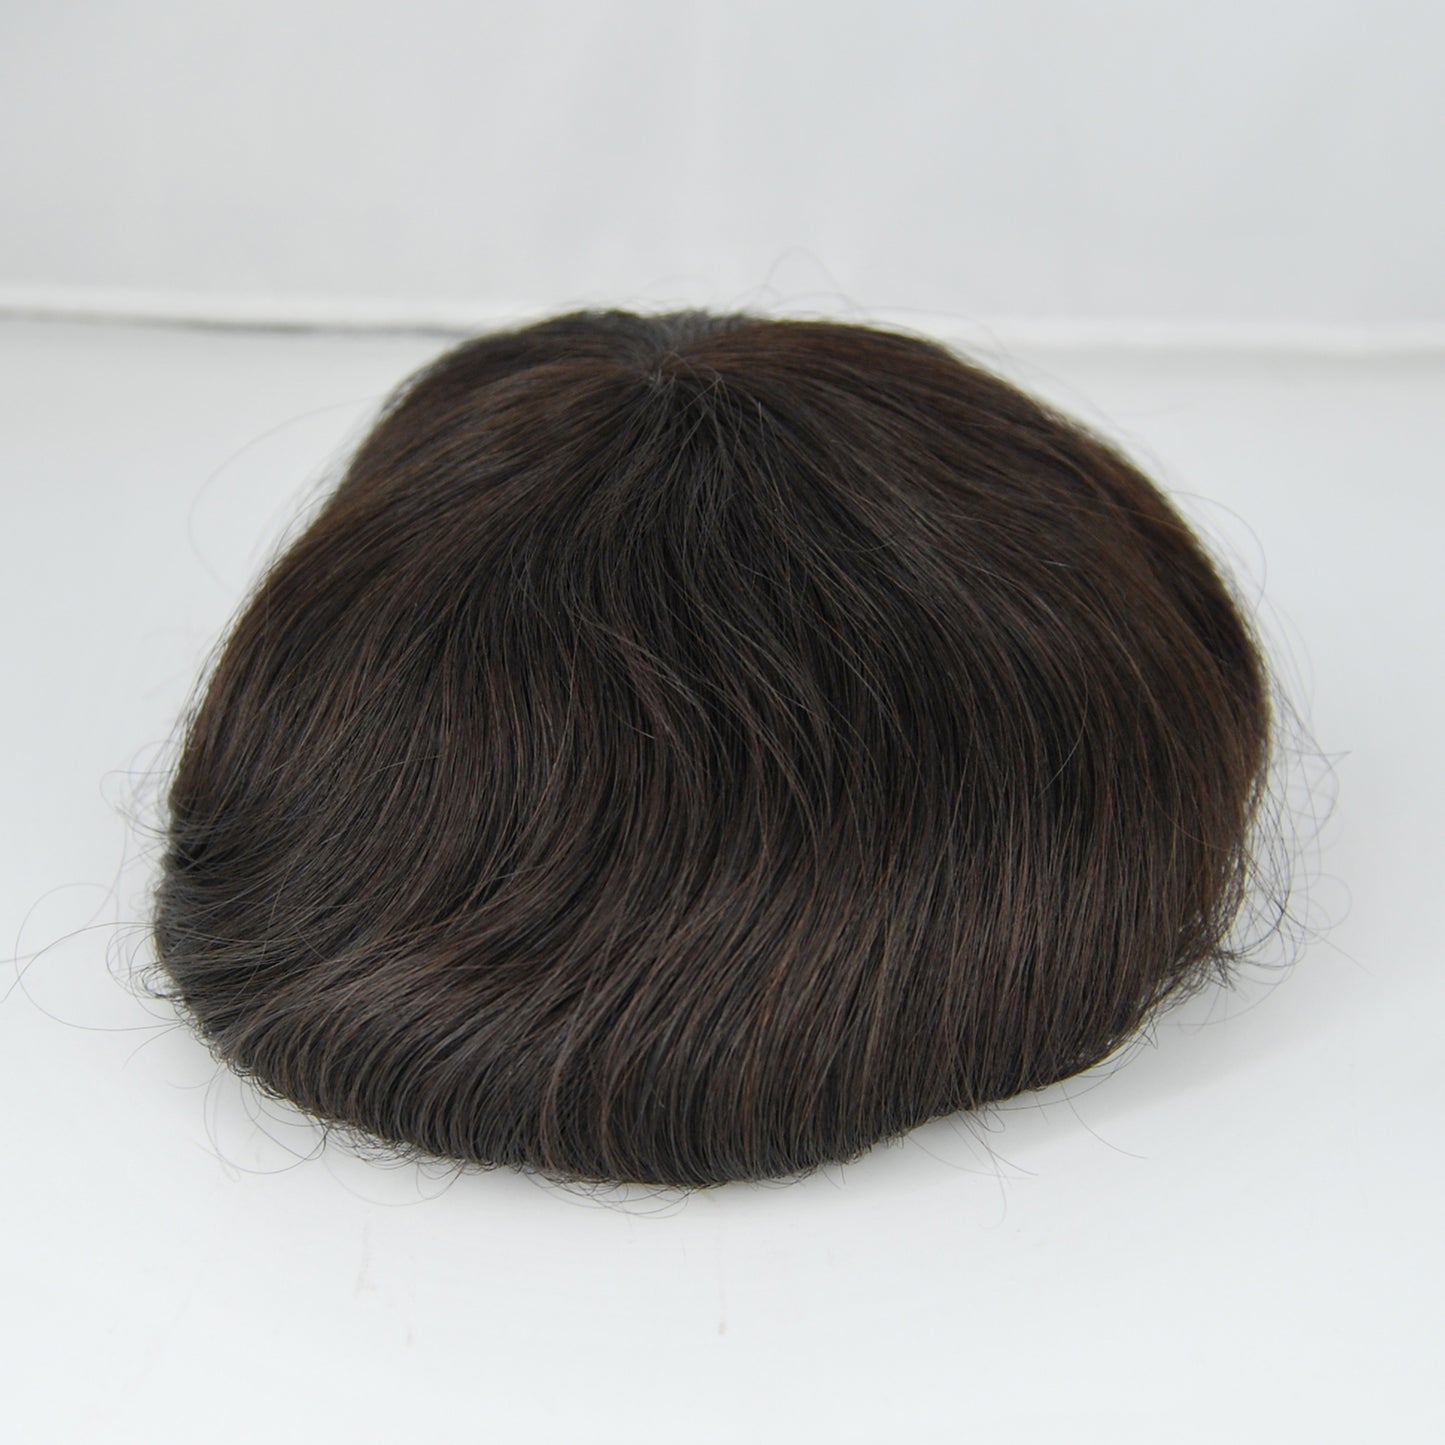 Clearance 8x6 " toupee for men natural black hair system for men thin PU injection